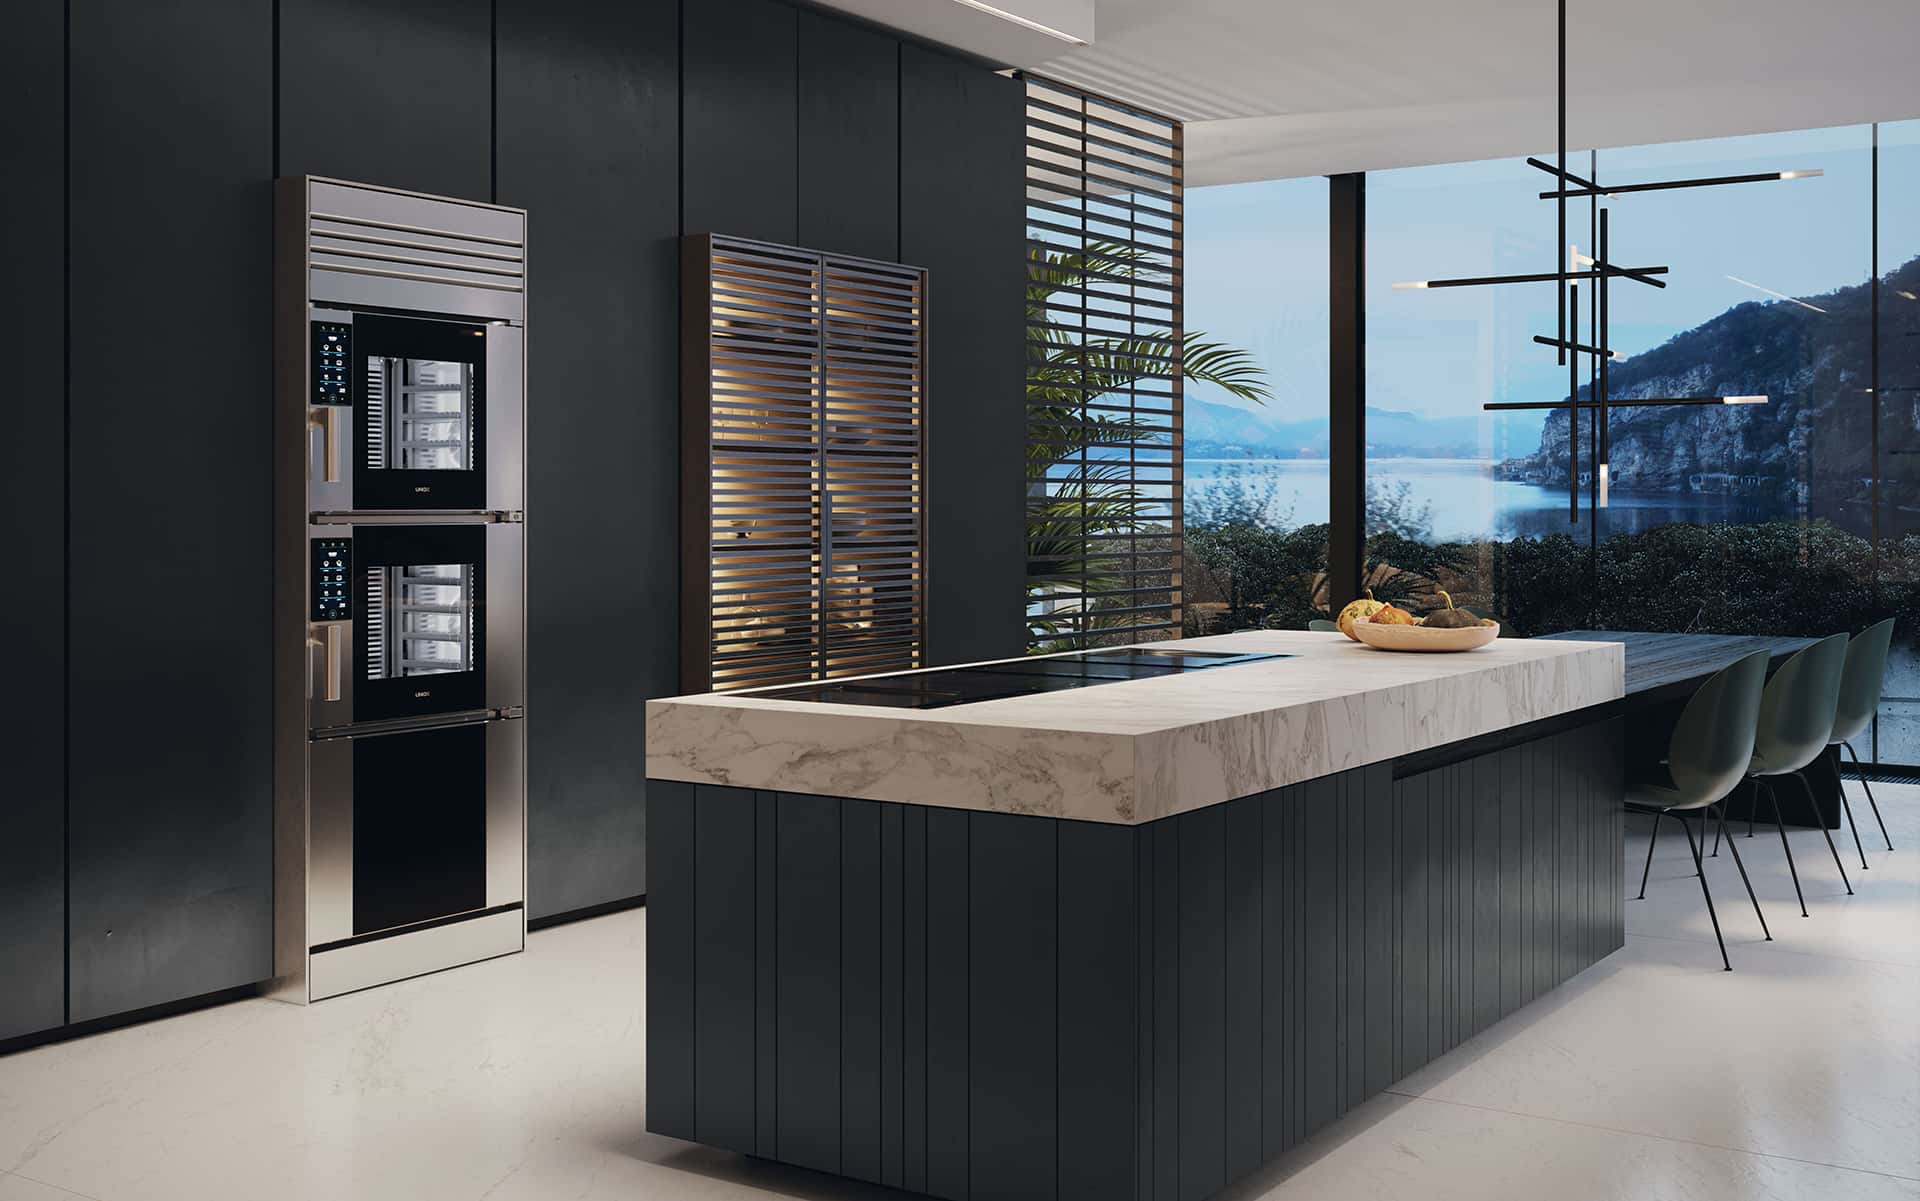 SuperOven Model 1 freestanding oven by Unox Casa inserted in a elegant kitchen overlooking Lake Maggiore